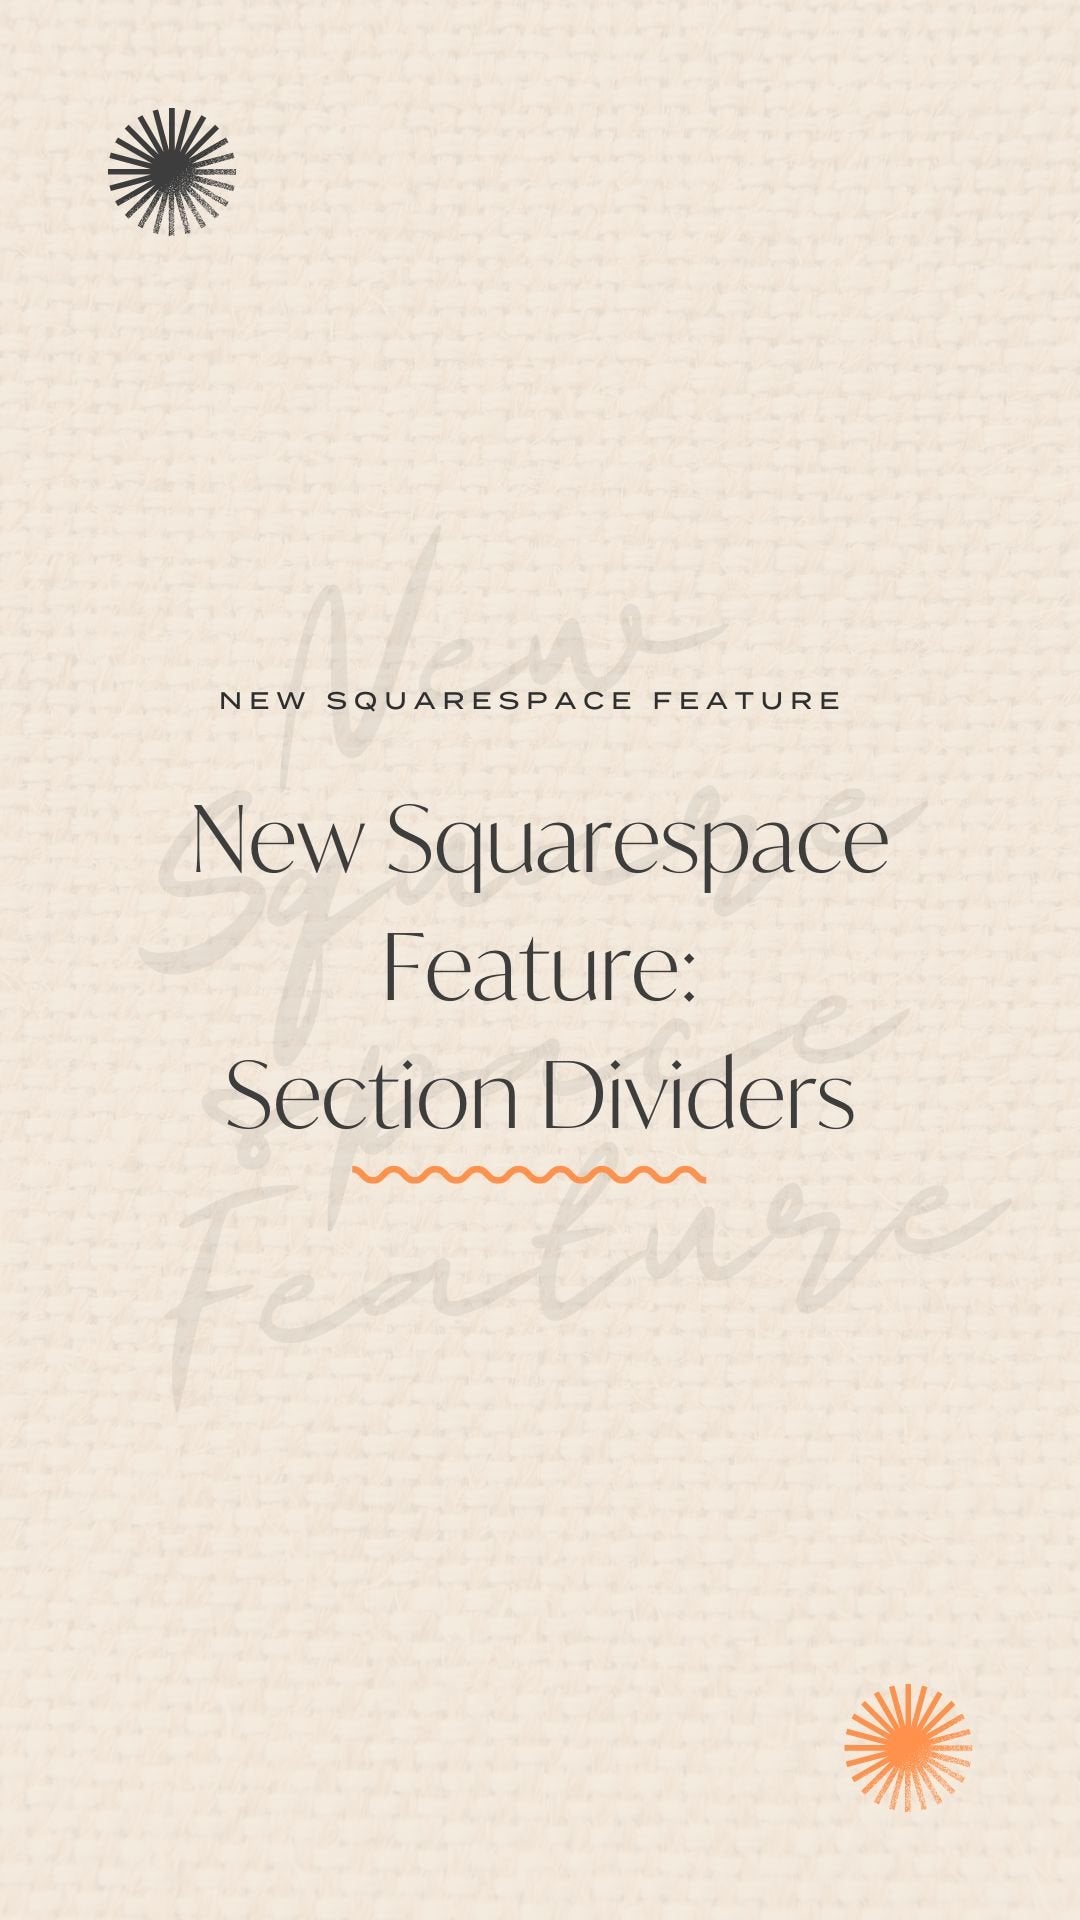 How to use the new Squarespace feature: Custom Section Dividers